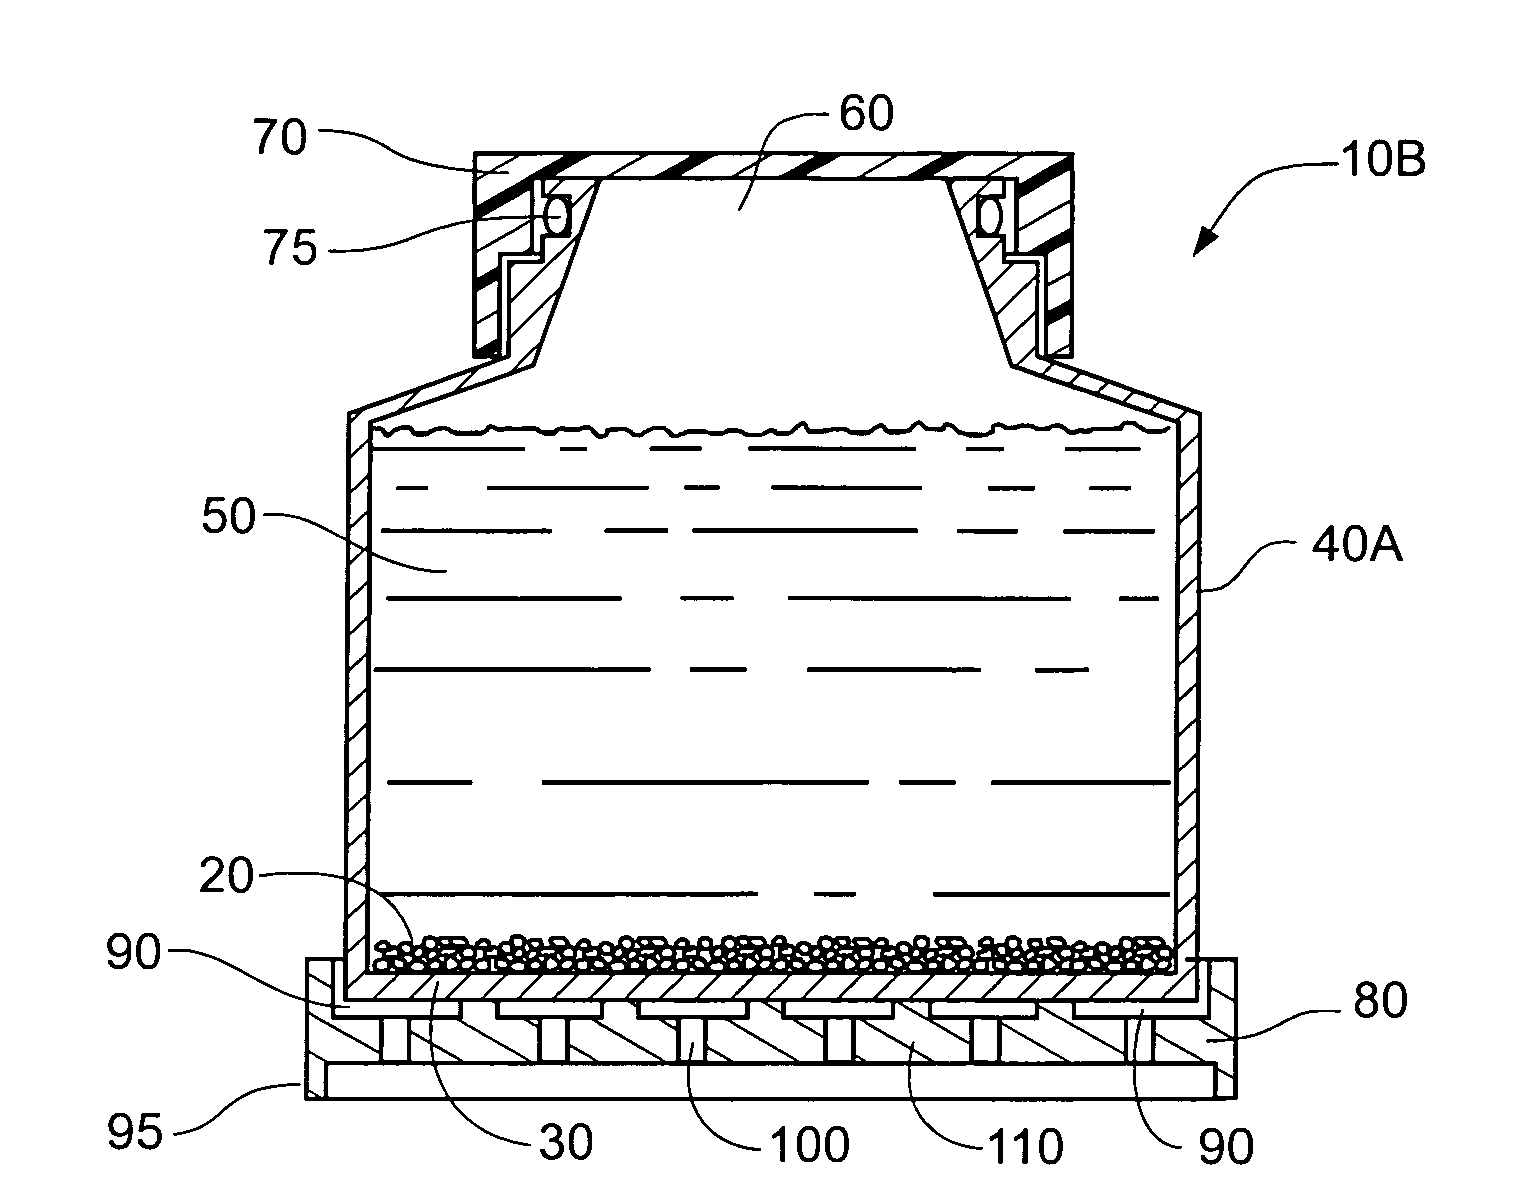 Cell culture methods and devices utilizing gas permeable materials